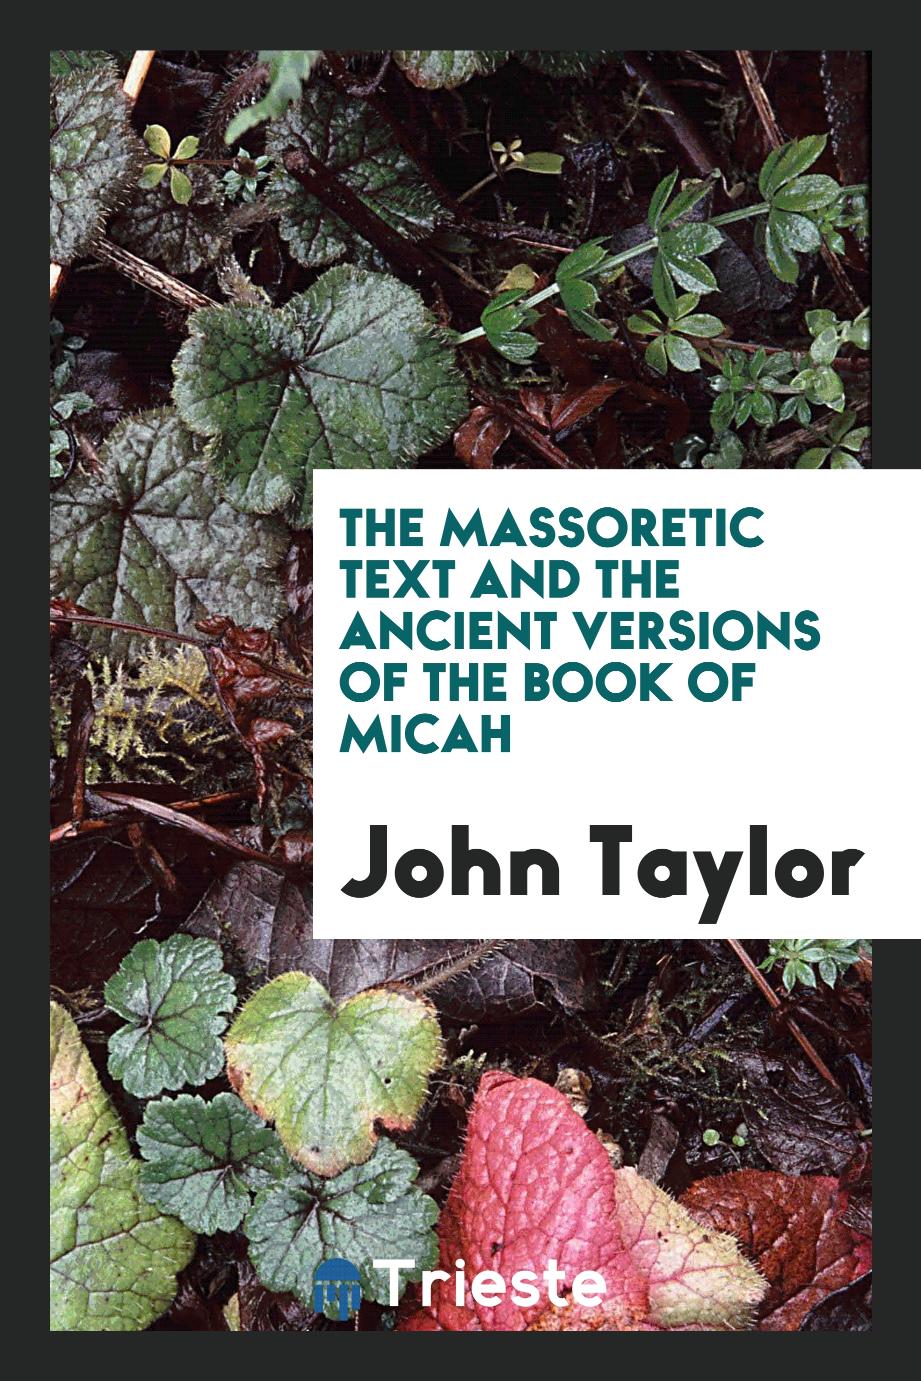 John Taylor - The Massoretic text and the ancient versions of the Book of Micah